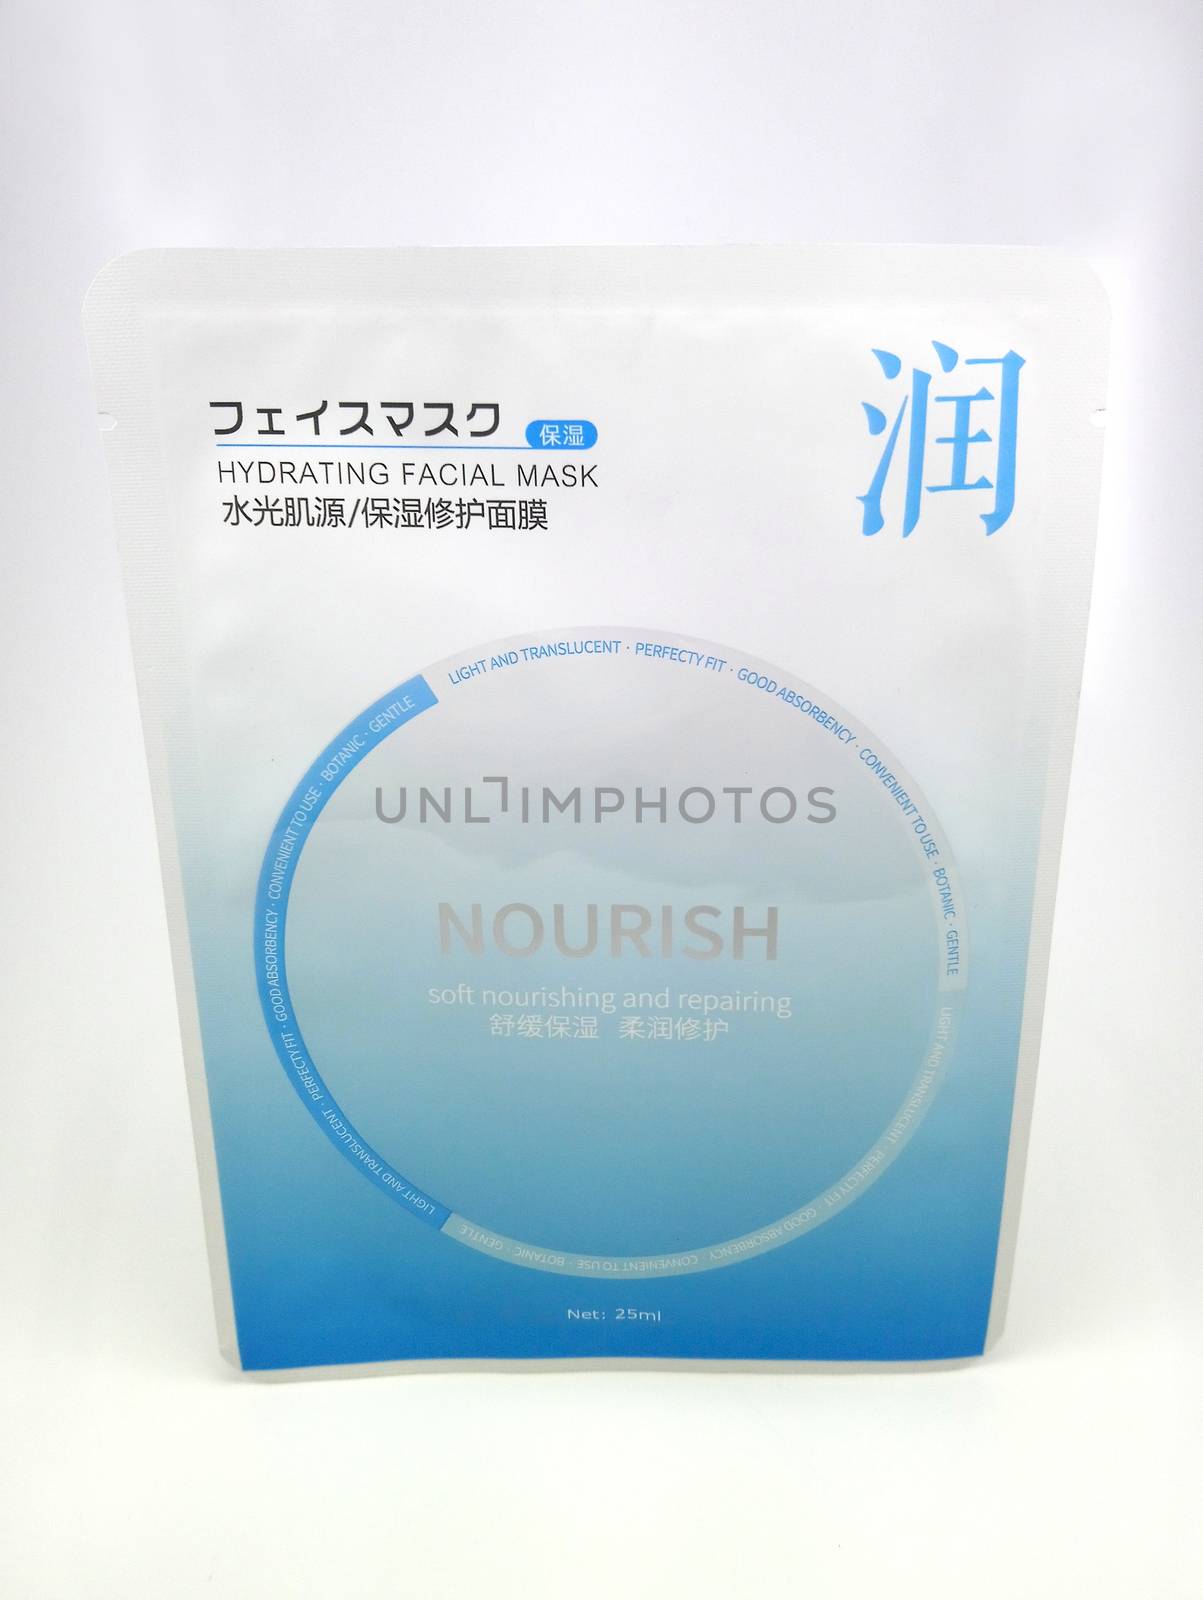 Hydrating facial mask nourish in Manila, Philippines by imwaltersy